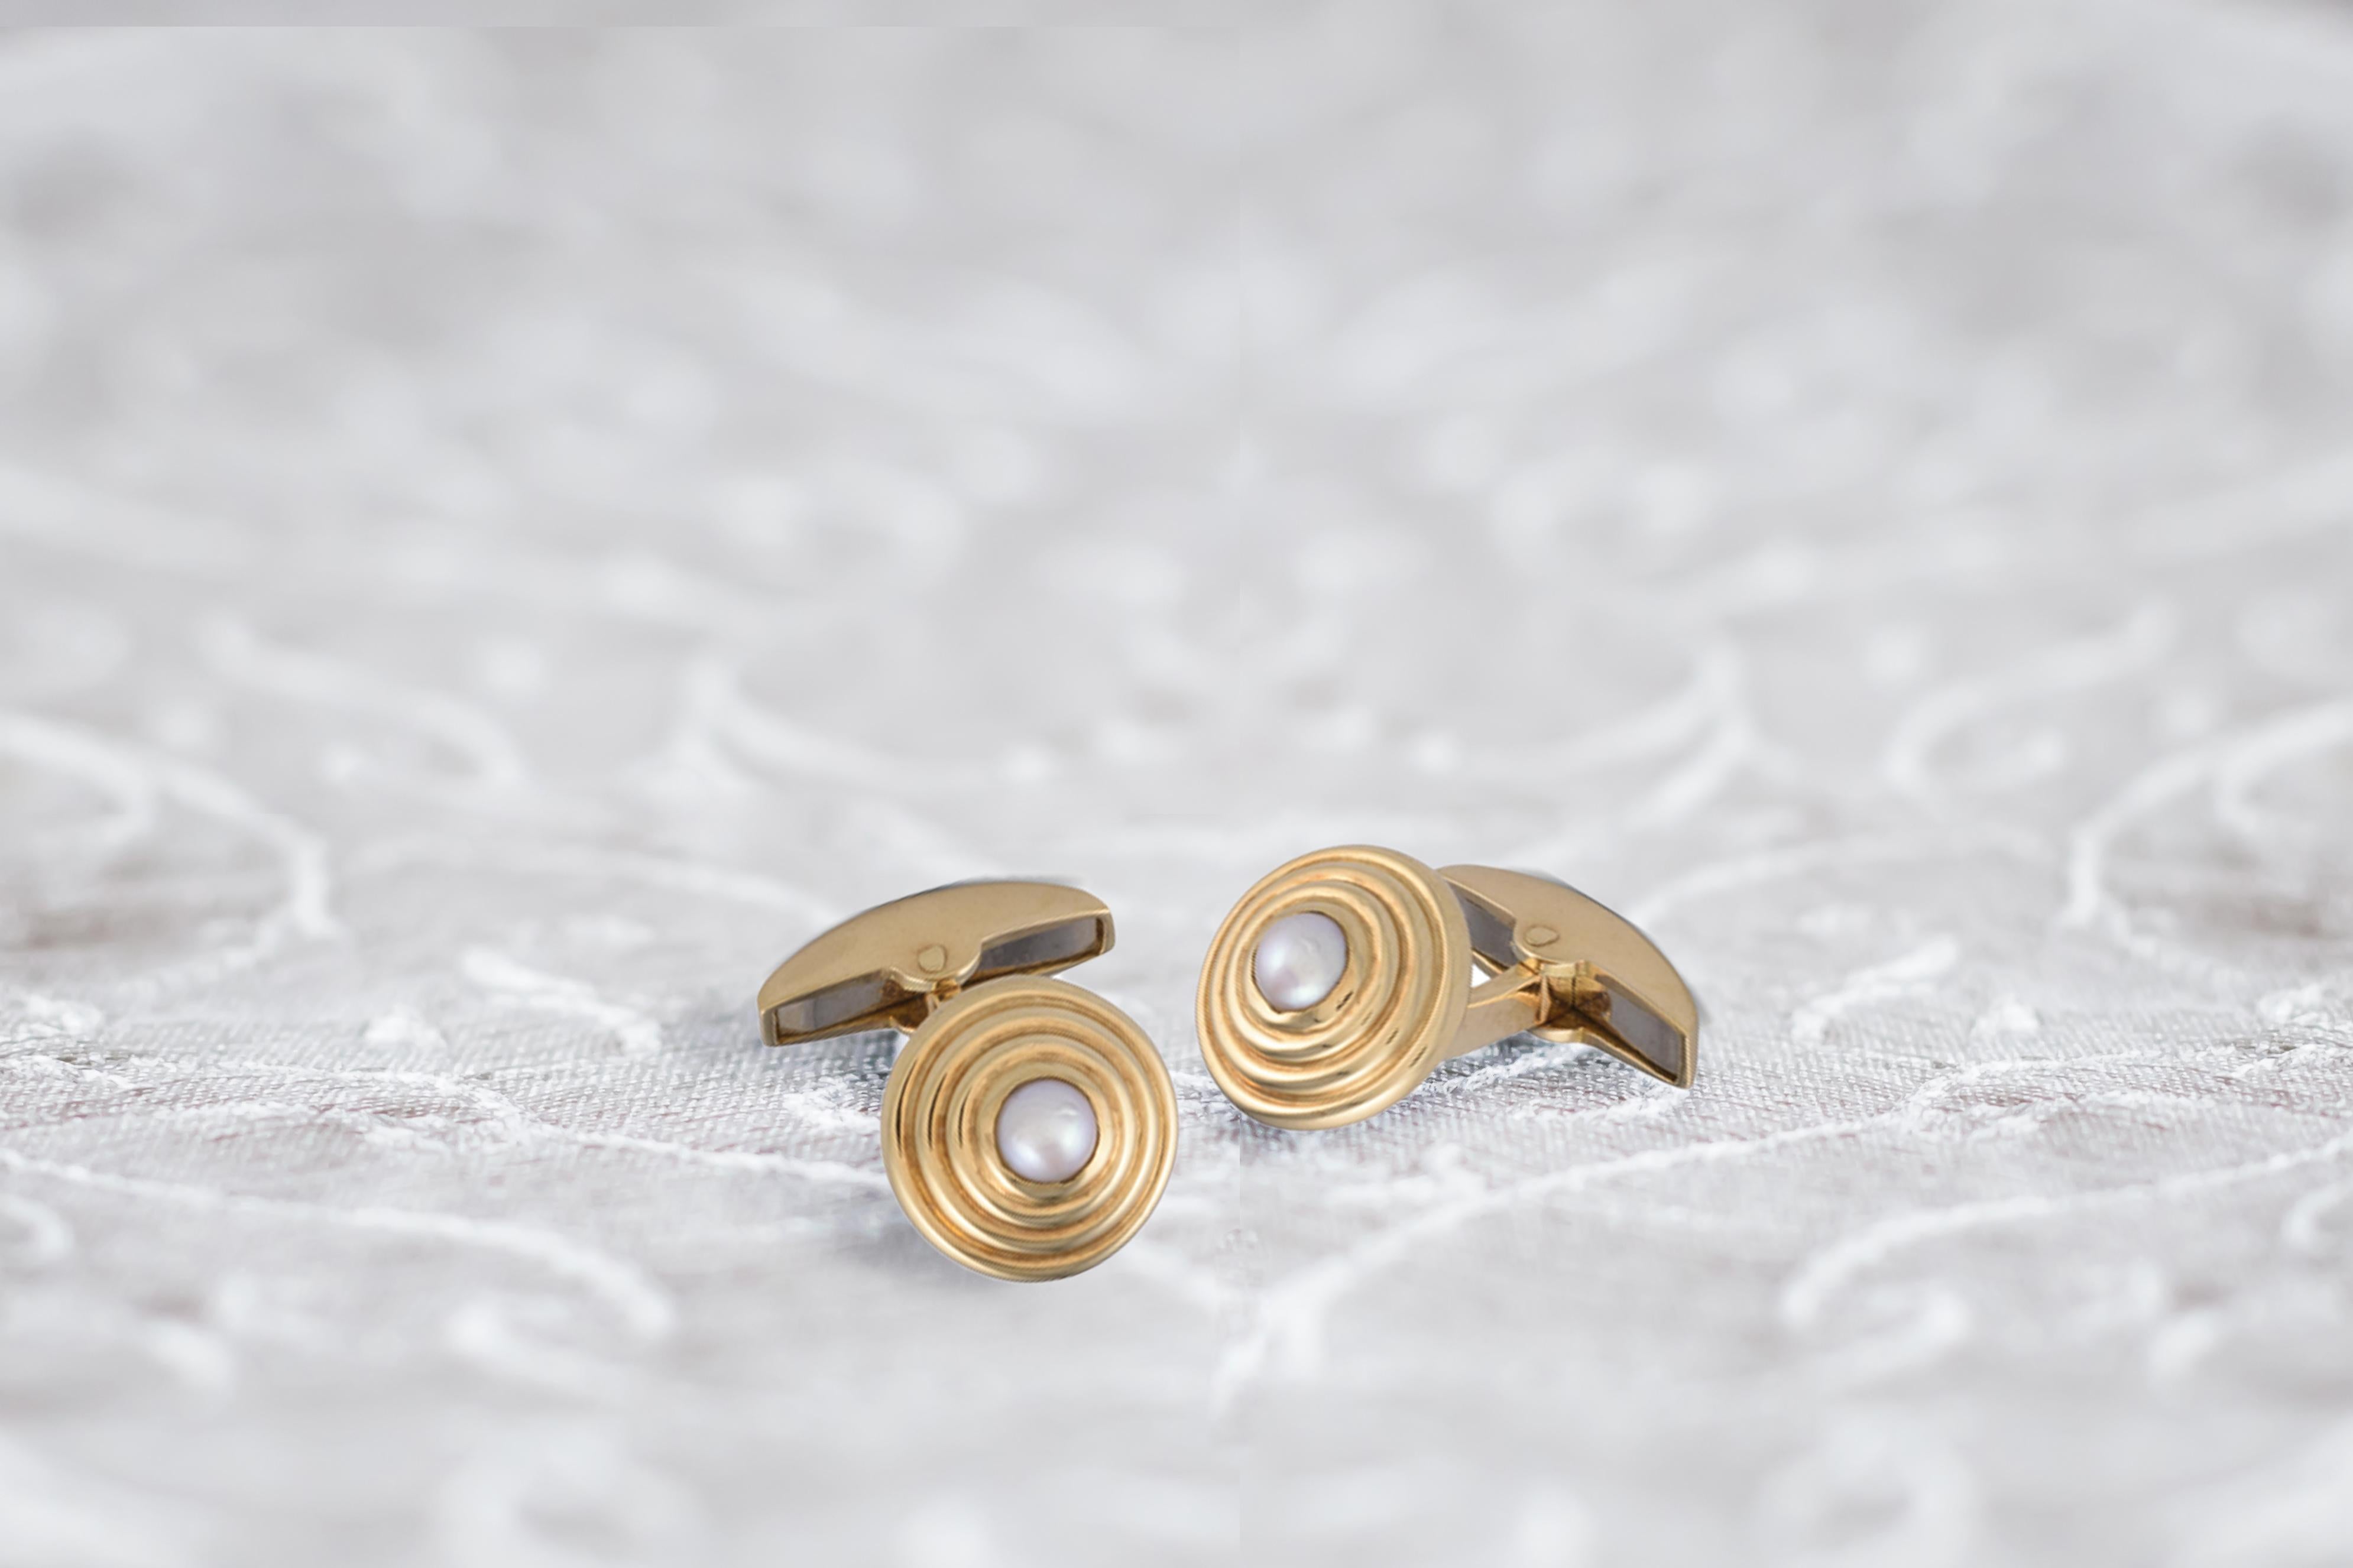 DEAKIN & FRANCIS, Piccadilly Arcade, London

These stunning 18kt gold and fresh water pearl cufflinks are perfect for all occasions. A truly classic pair of cufflinks that add a touch of elegance to any outfit!